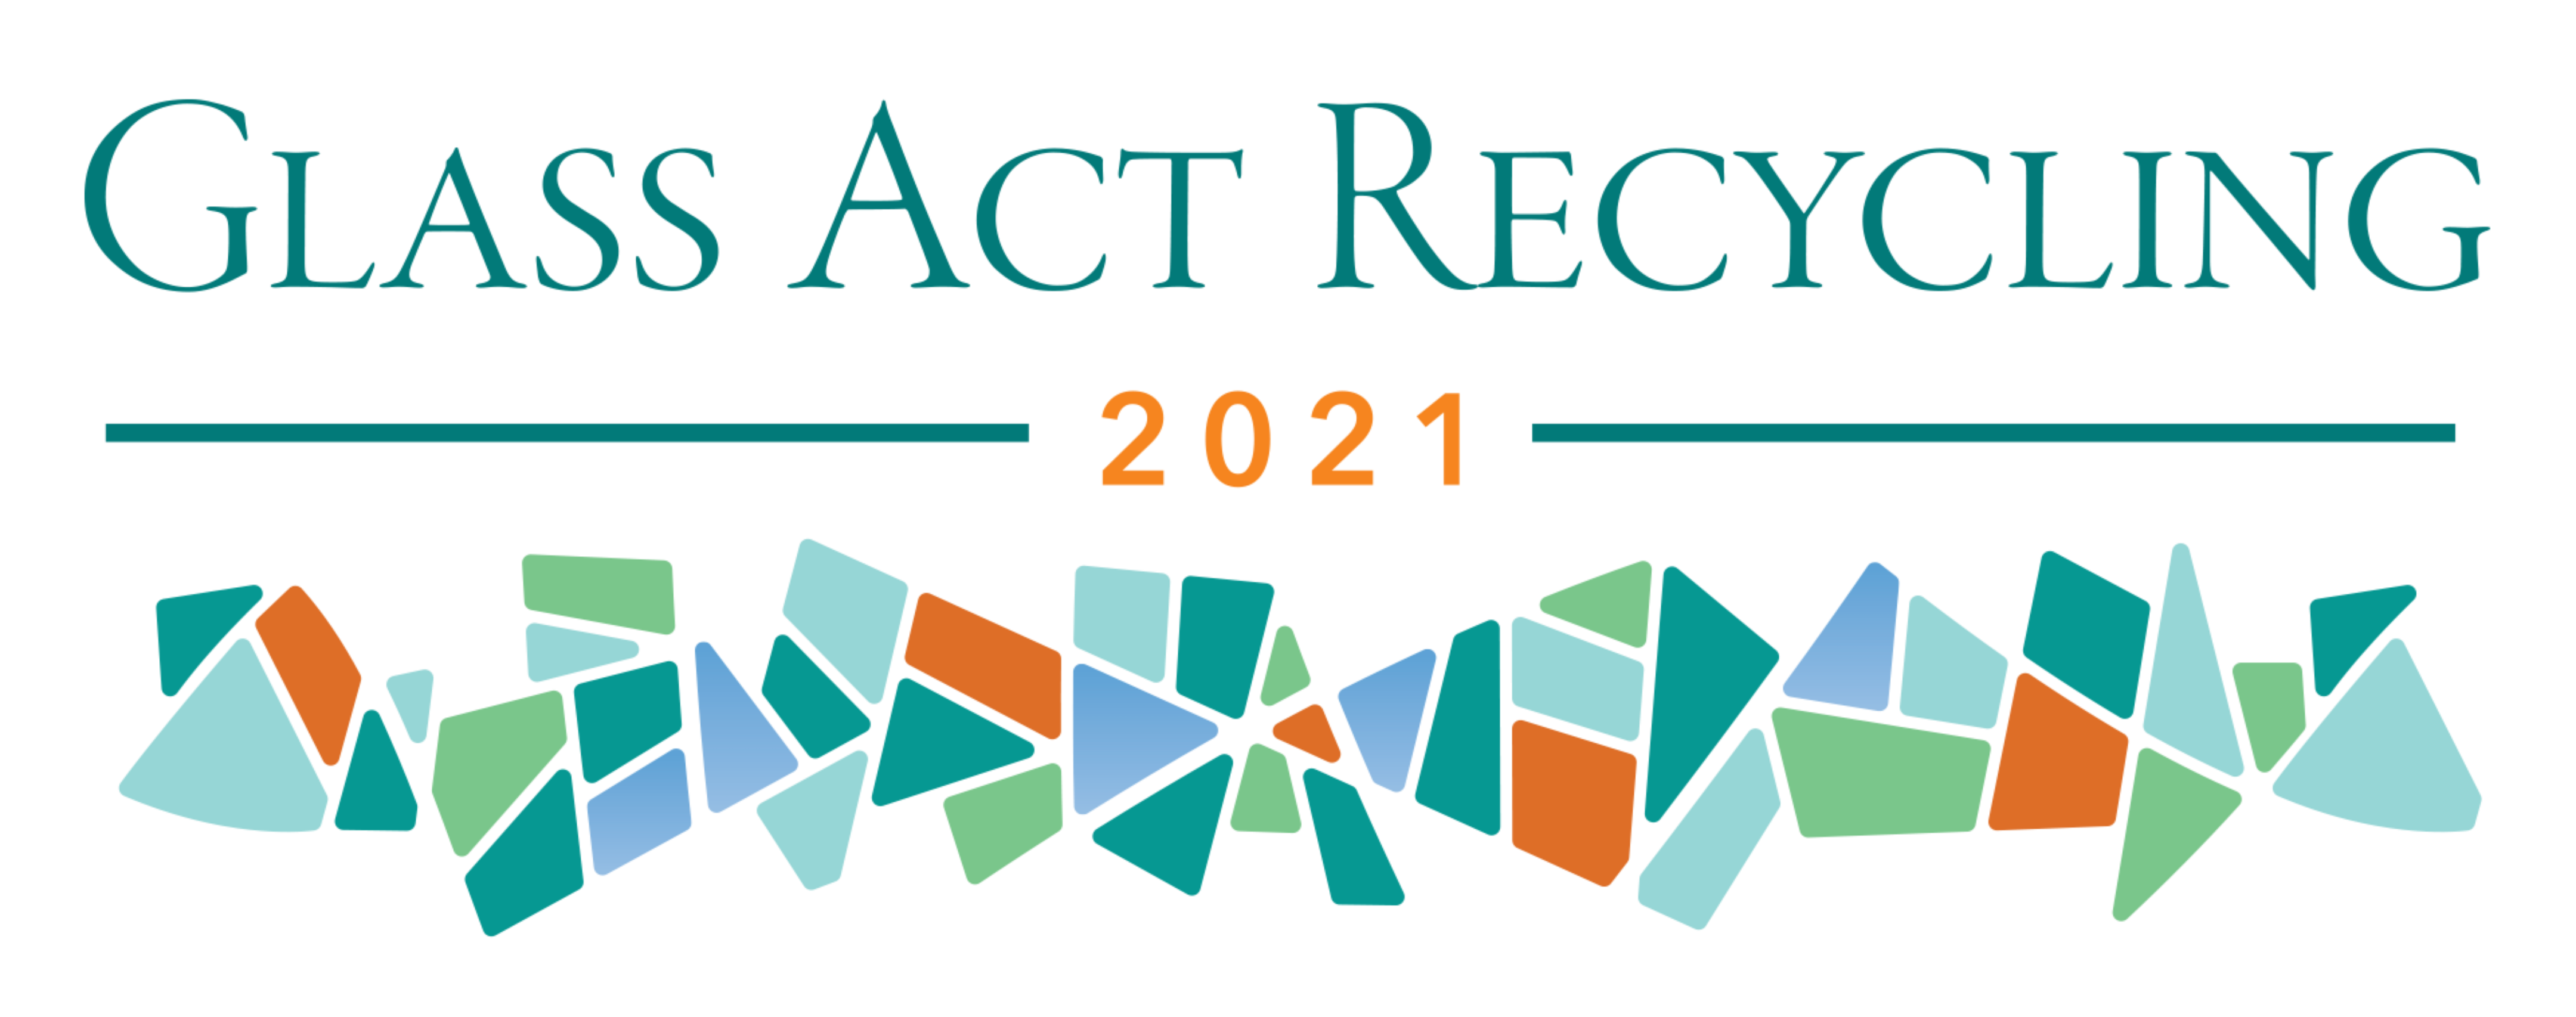 Glass Act Recycling